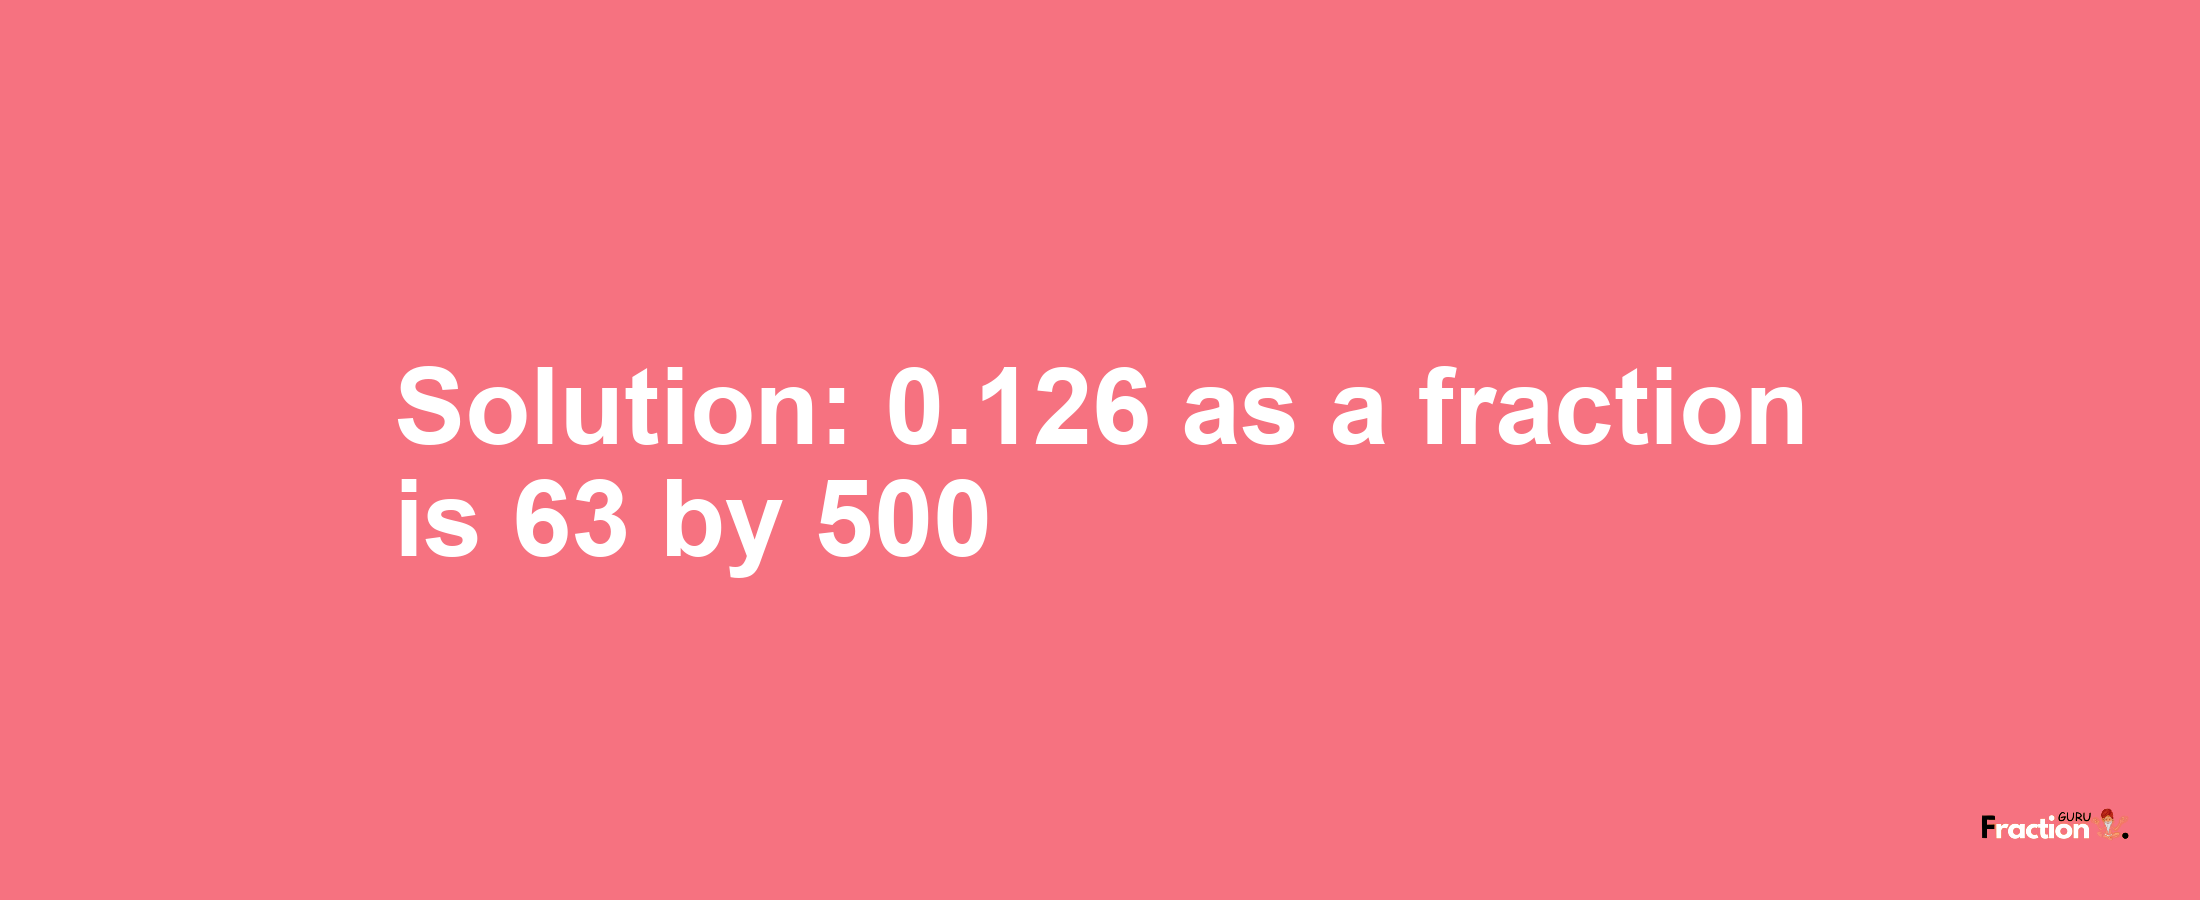 Solution:0.126 as a fraction is 63/500